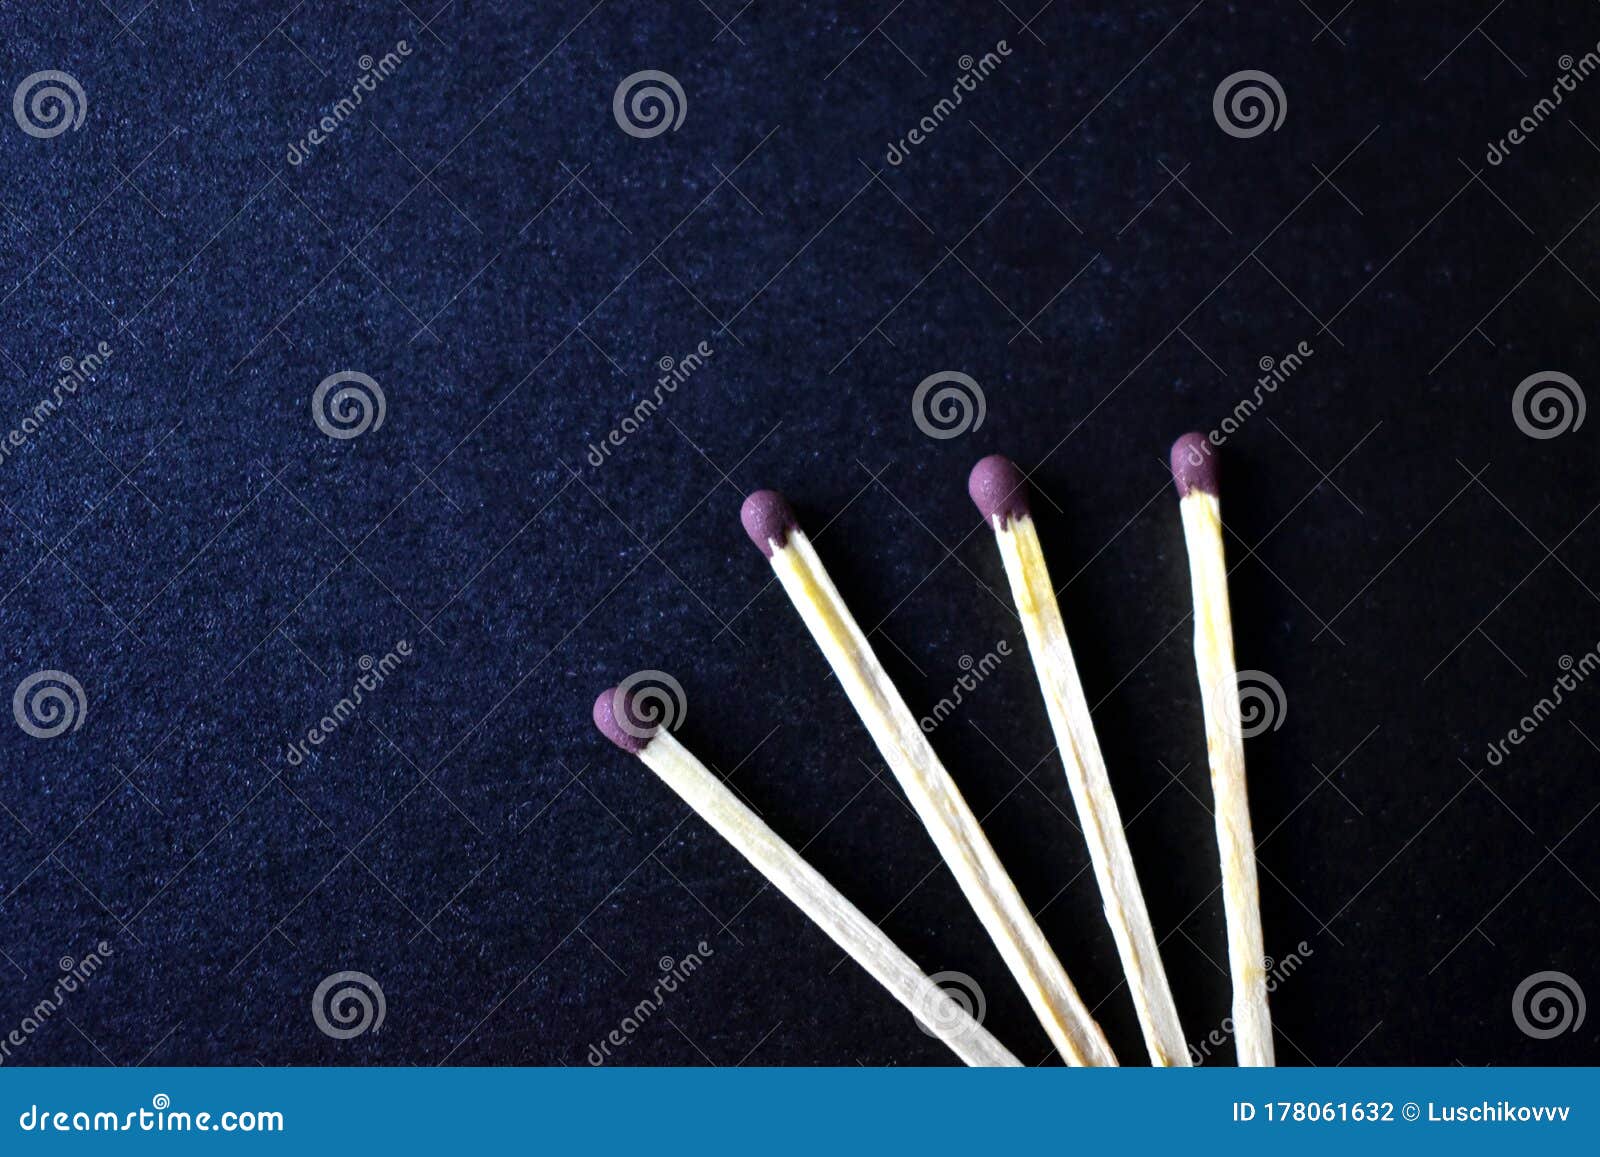 household matches and boxes for lighting on a blue background